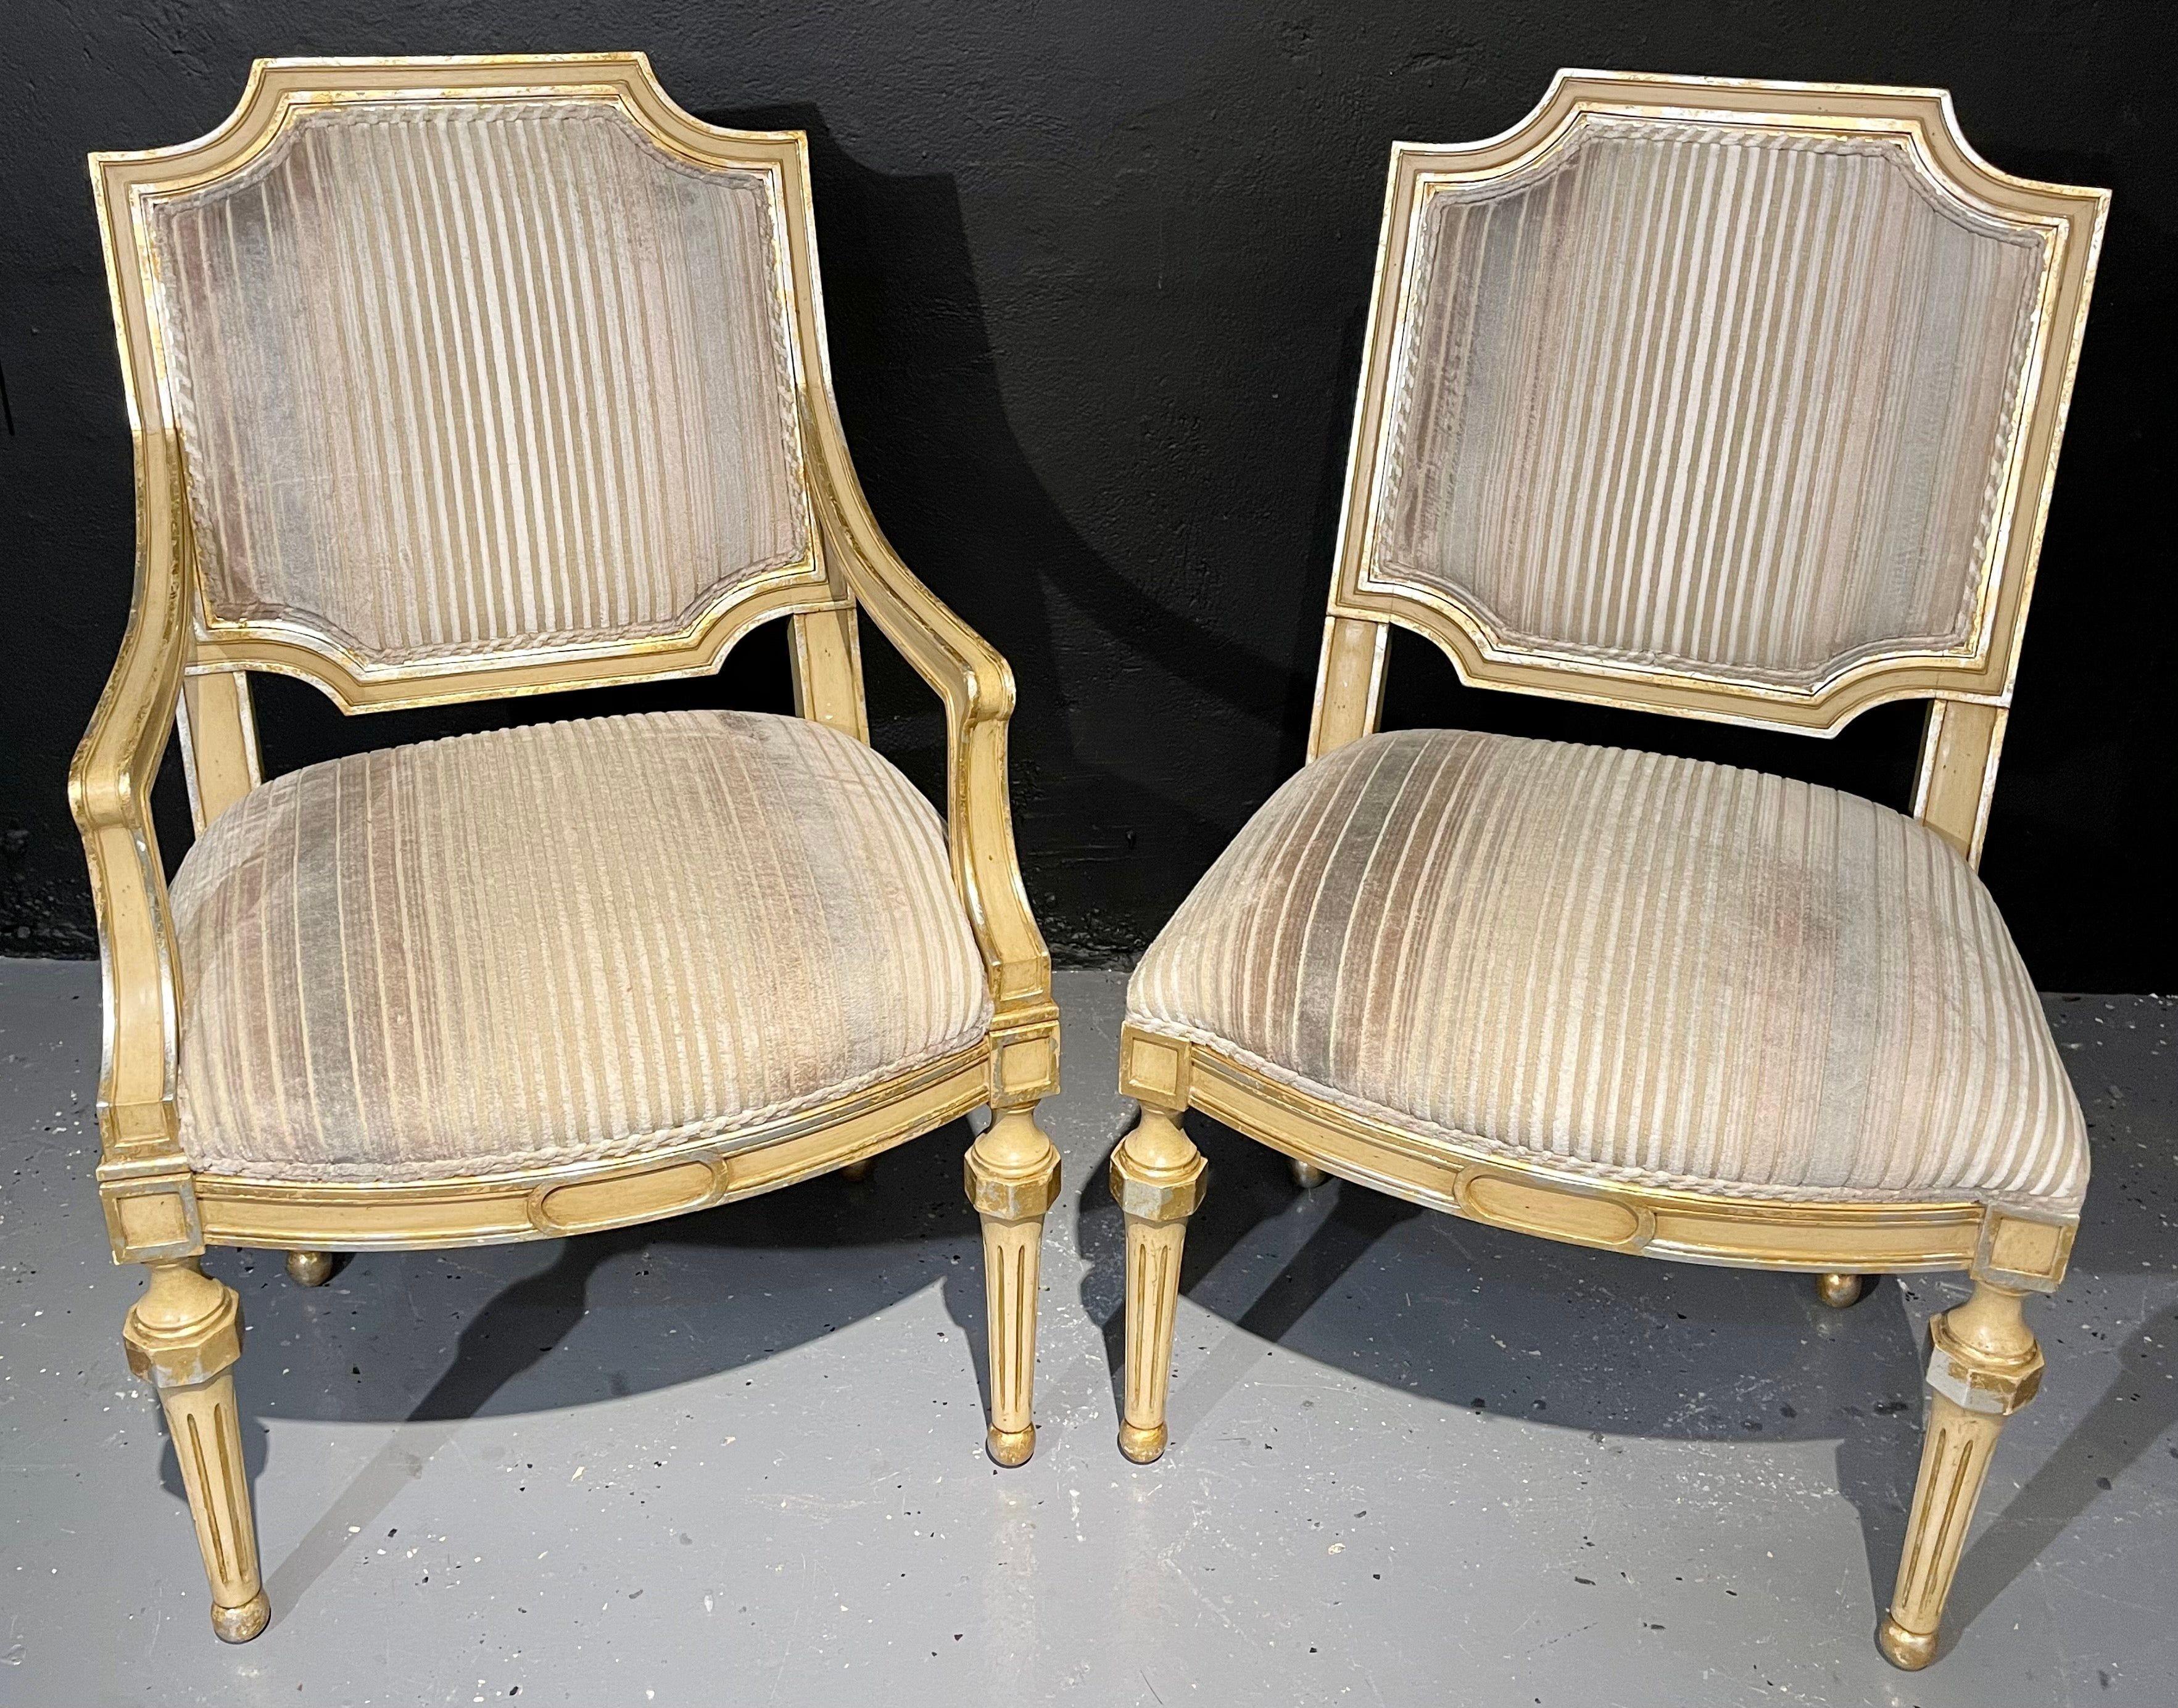 20th Century Set of Eight Louis XVI Style Dining Chairs Painted and Parcel-Gilt, Jansen Style